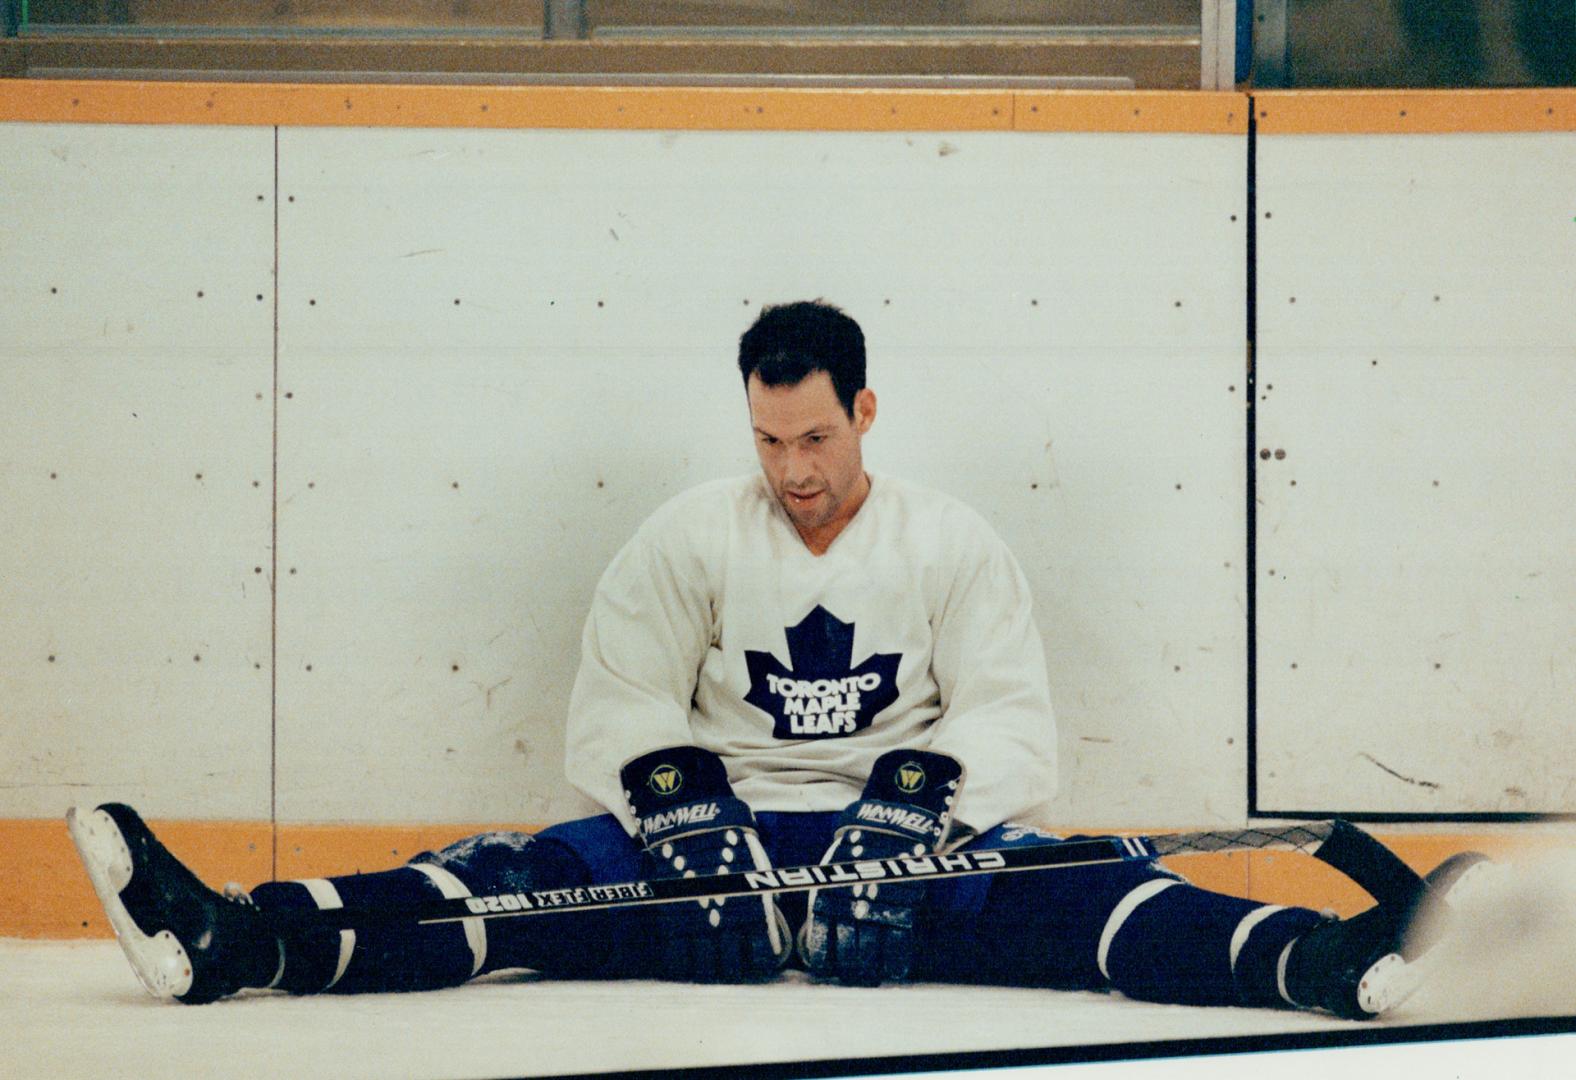 Down in the dumps: Veteran defenceman Brad Marsh takes a break during yesterday's Leaf practice at the Gardens, perhaps contemplating why coach Tom Watt has used him so infrequently of late